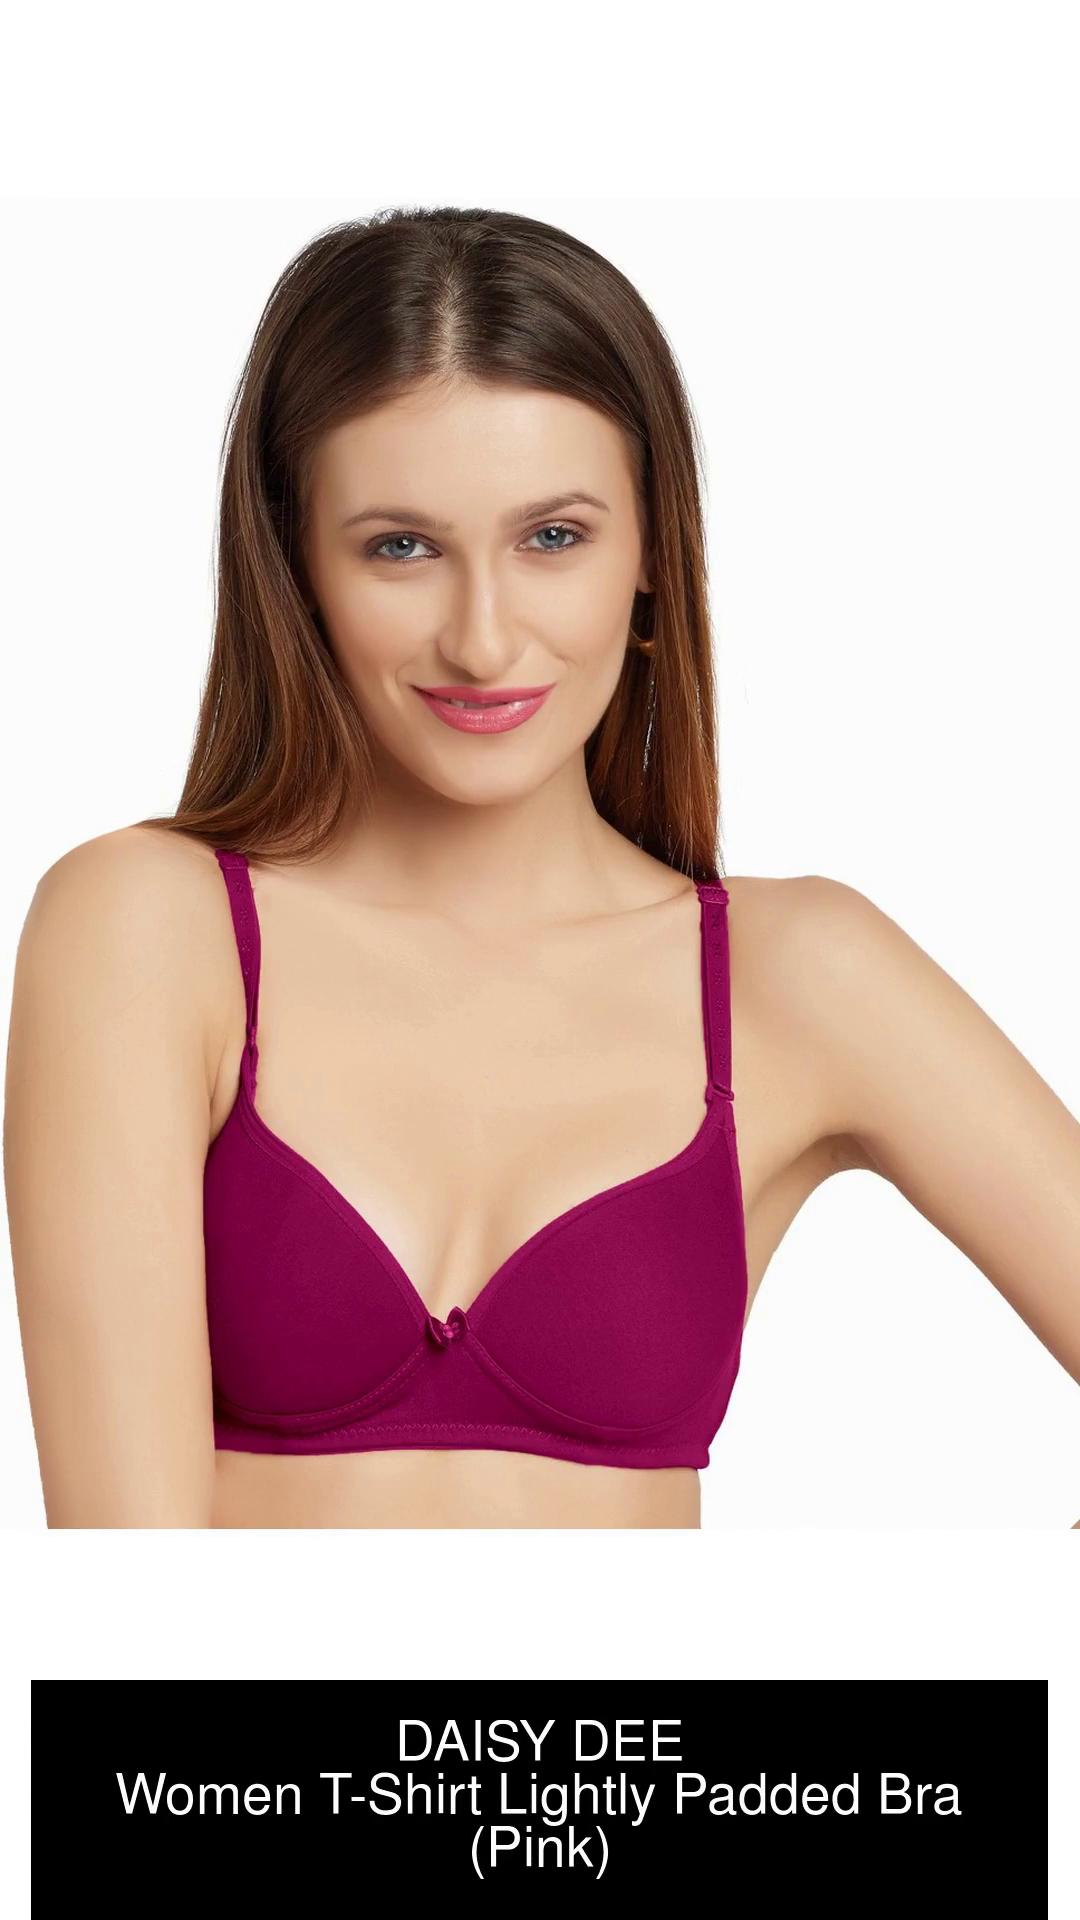 DAISY DEE Women T-Shirt Lightly Padded Bra - Buy DAISY DEE Women T-Shirt  Lightly Padded Bra Online at Best Prices in India